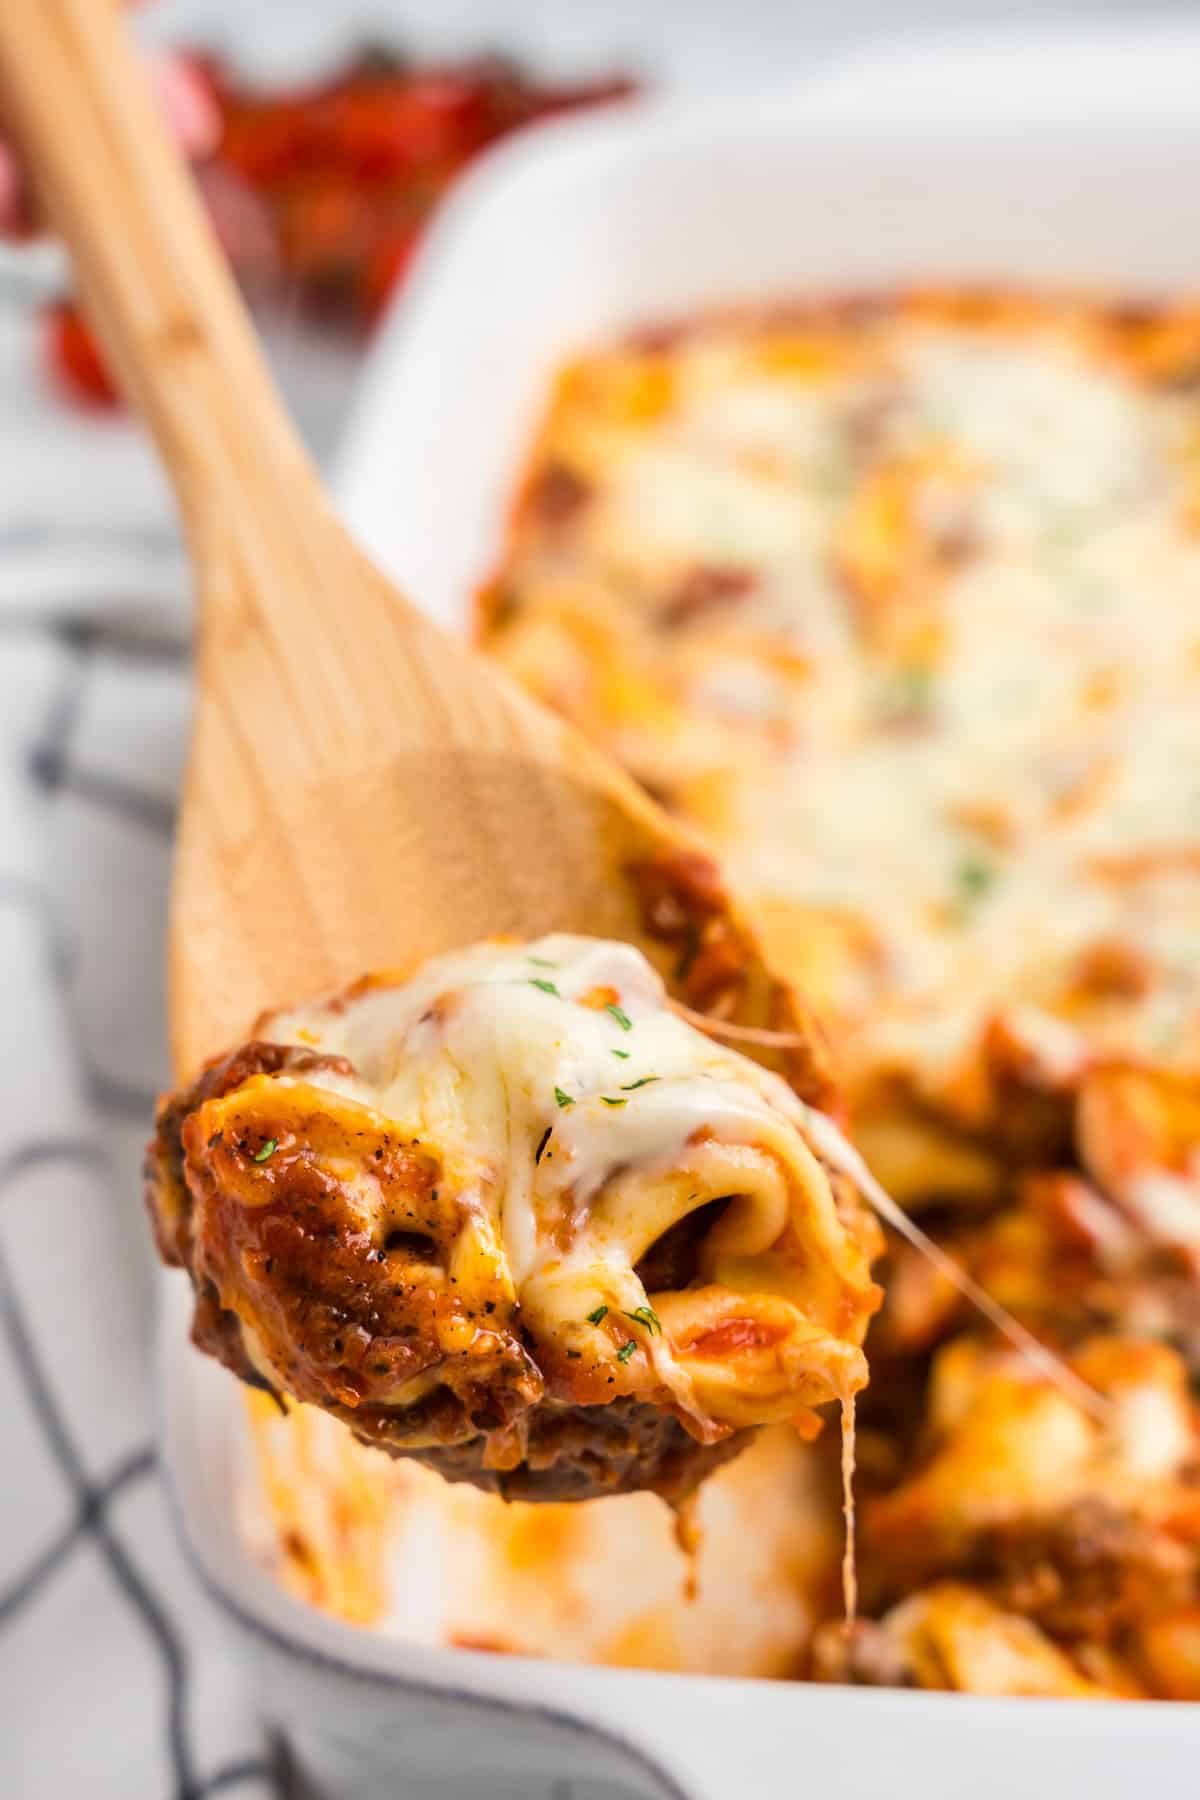 Using wooden spoon to scoop Baked Tortellini from baking dish